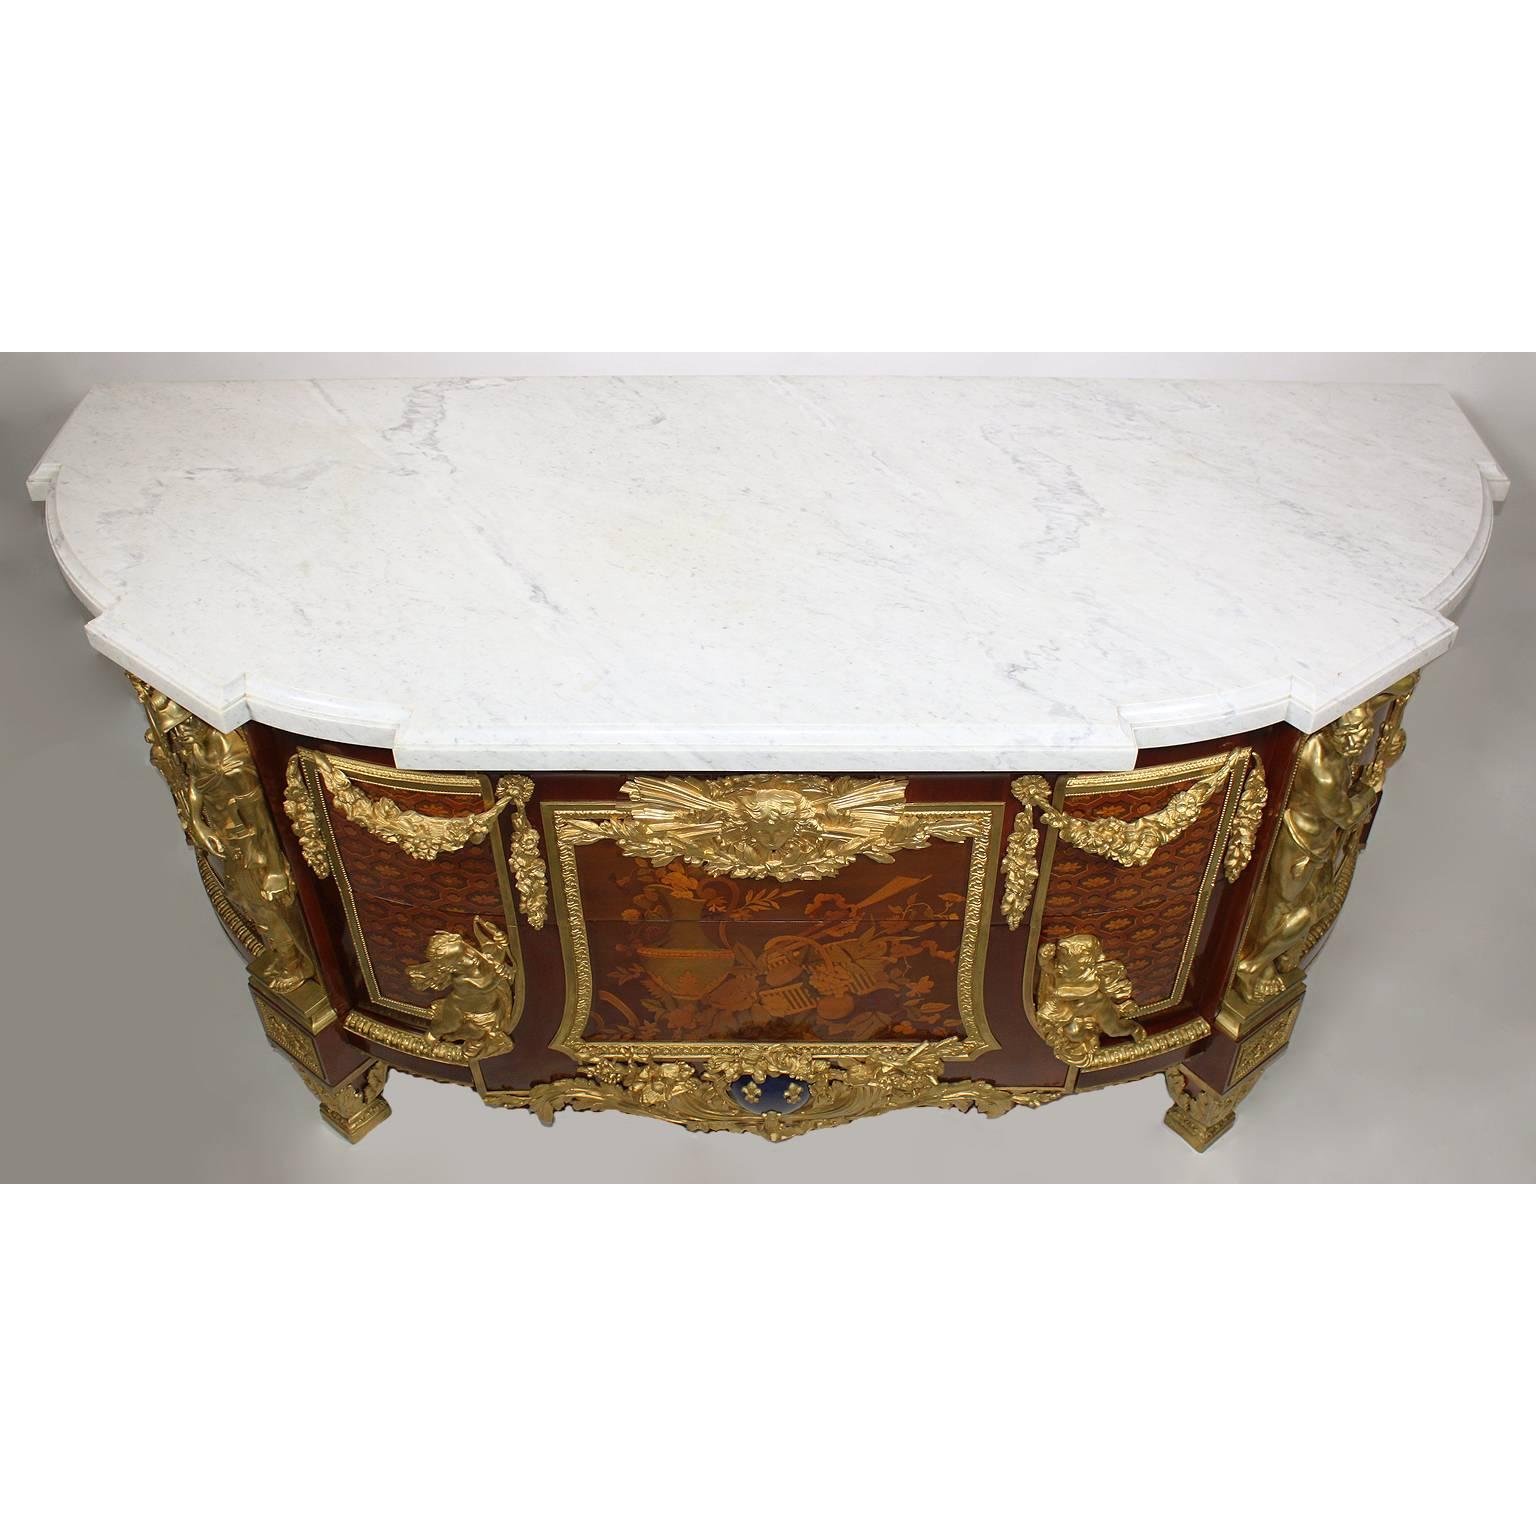 Fine French 19th Century Louis XVI Style Marquetry & Gilt-Bronze Mounted Commode For Sale 4